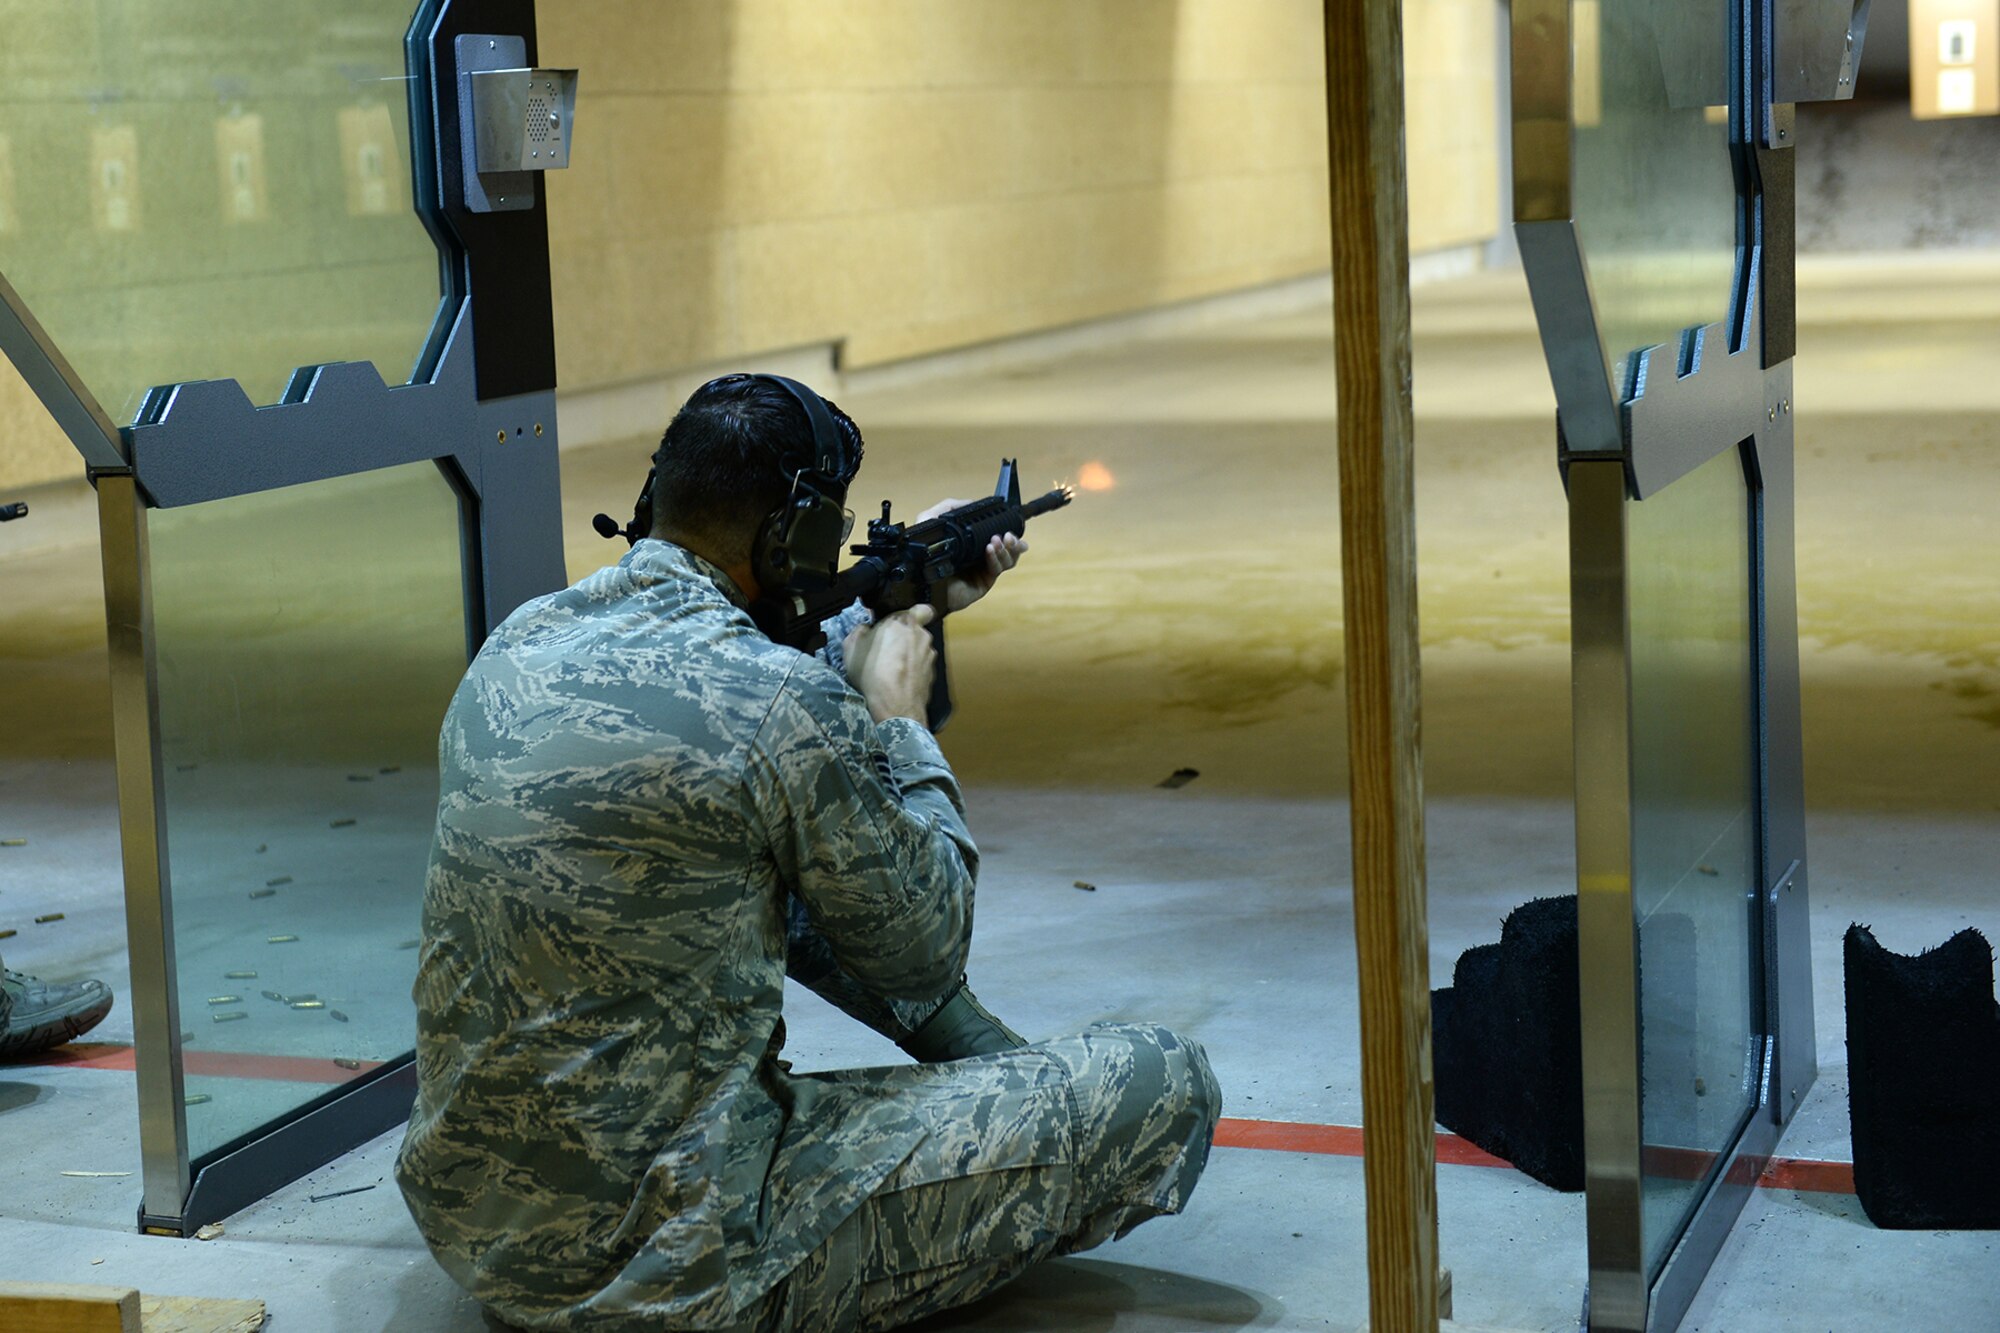 Staff Sgt. Tyler Senecal, 55th Security Forces Squadron training instructor, fires a M-16 rifle at a paper target during an excellence in competition and shooting event May 14, 2018, at Offutt Air Force Base, Nebraska. Offutt’s defenders participated in local events as well as coordinating base events to recognize the contributions of police across the nation. (U.S. Air Force photo by Charles J. Haymond)